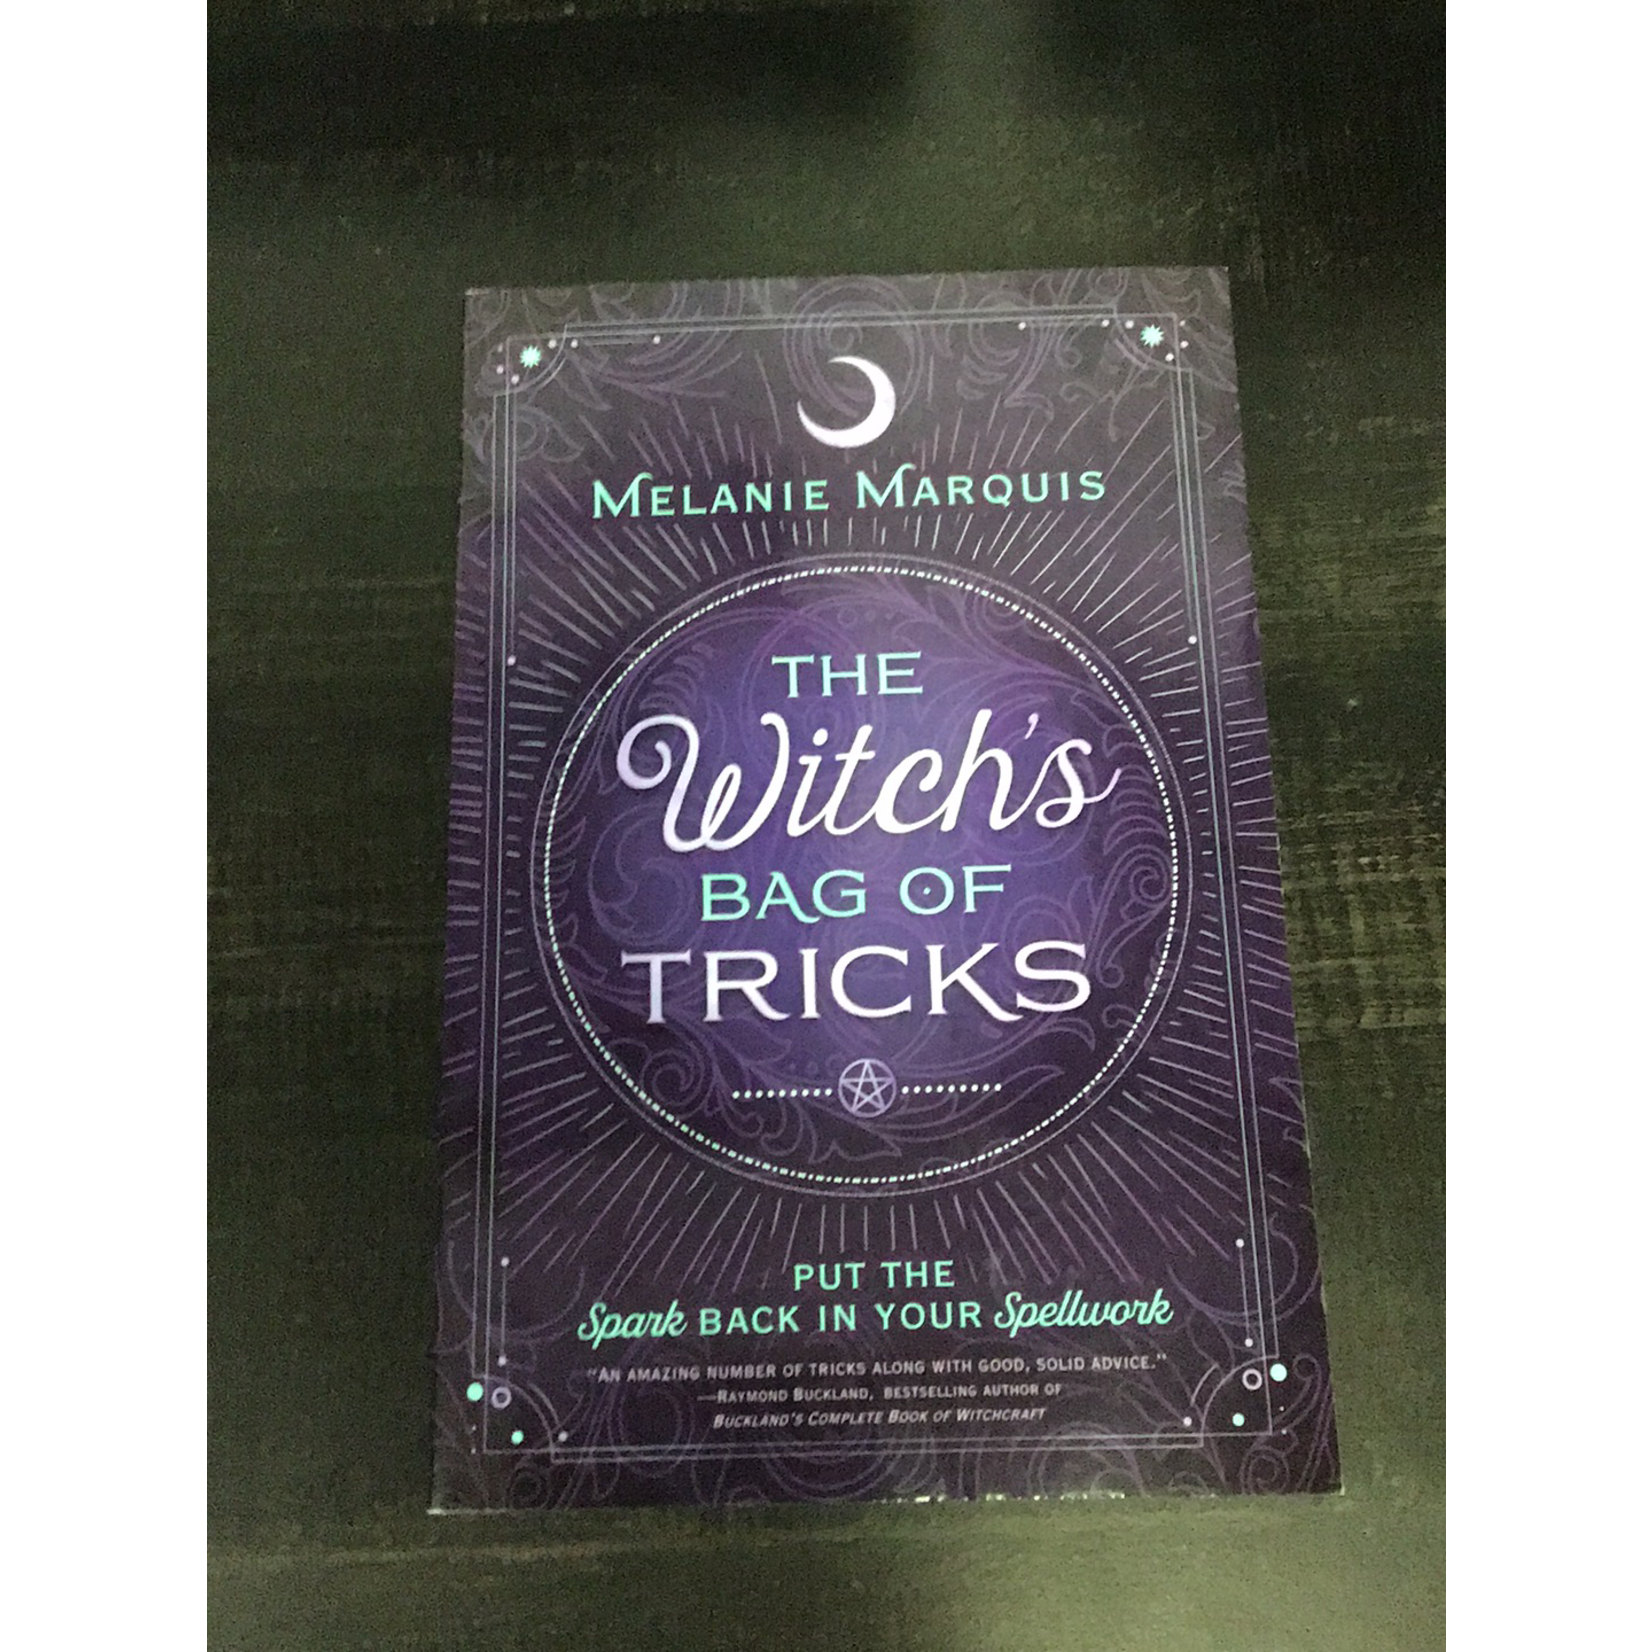 The Witch's Bag of Tricks - Melanie Marquis